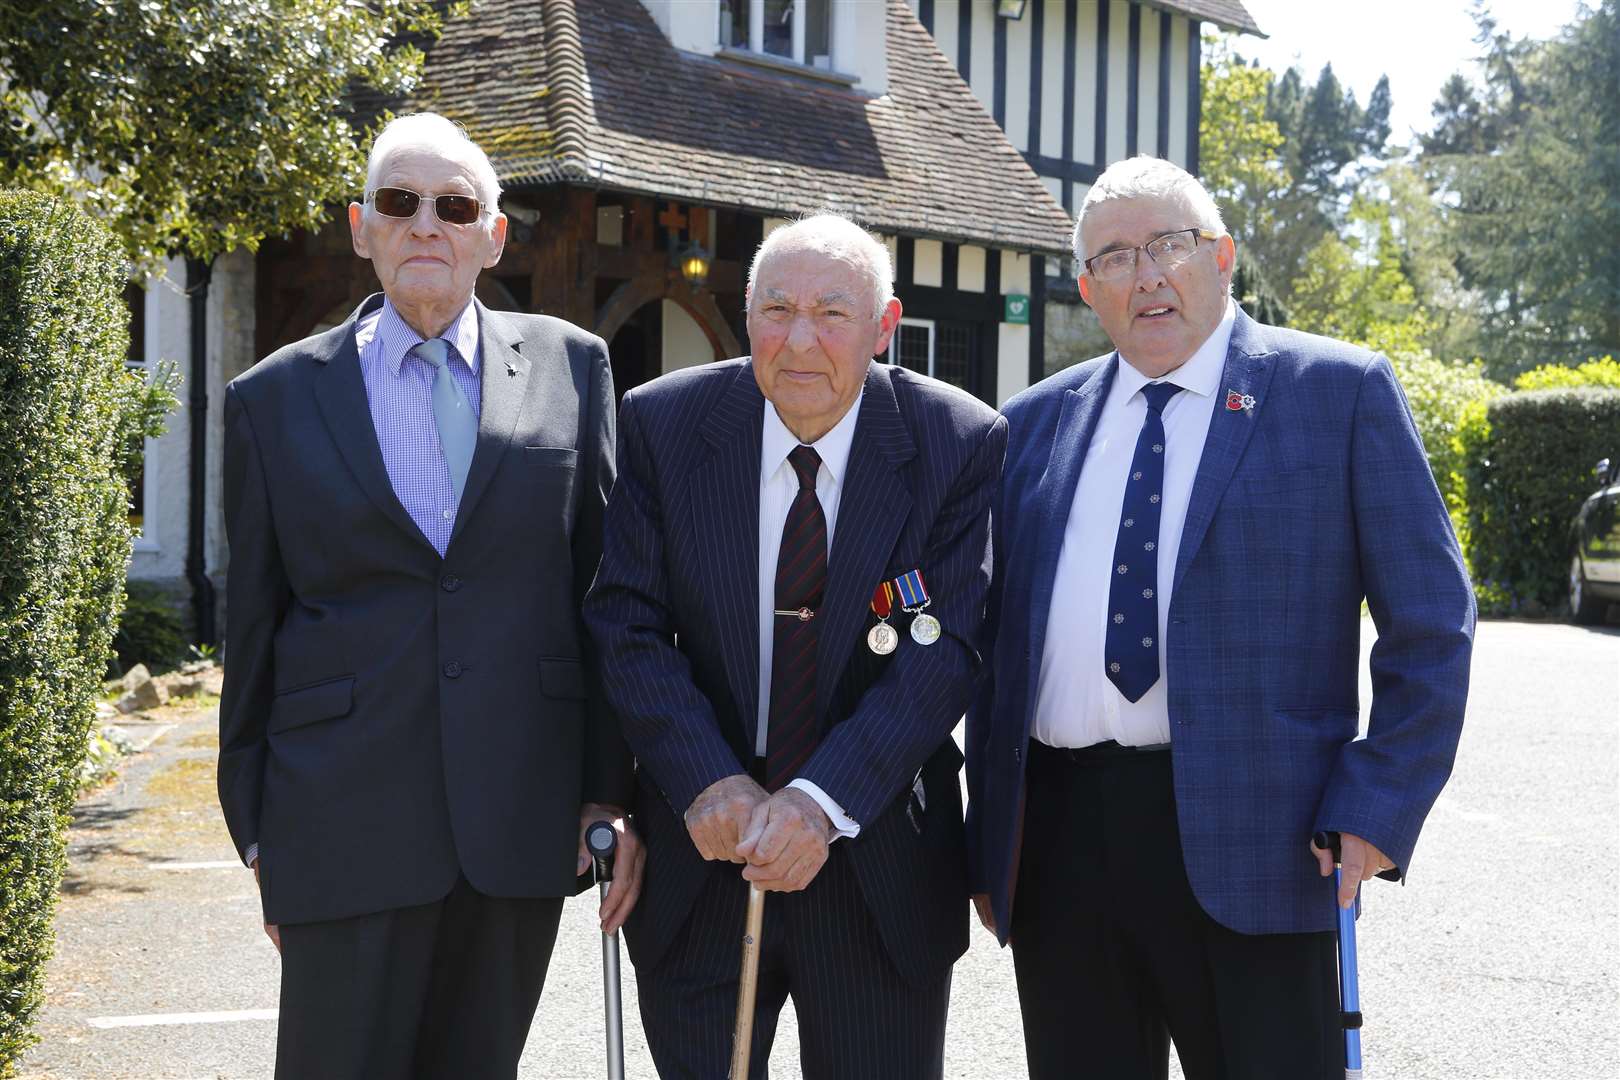 National Firefighters Memorial Day. From left: retired firefighters Peter Whent, Don Bates and Tony Bush